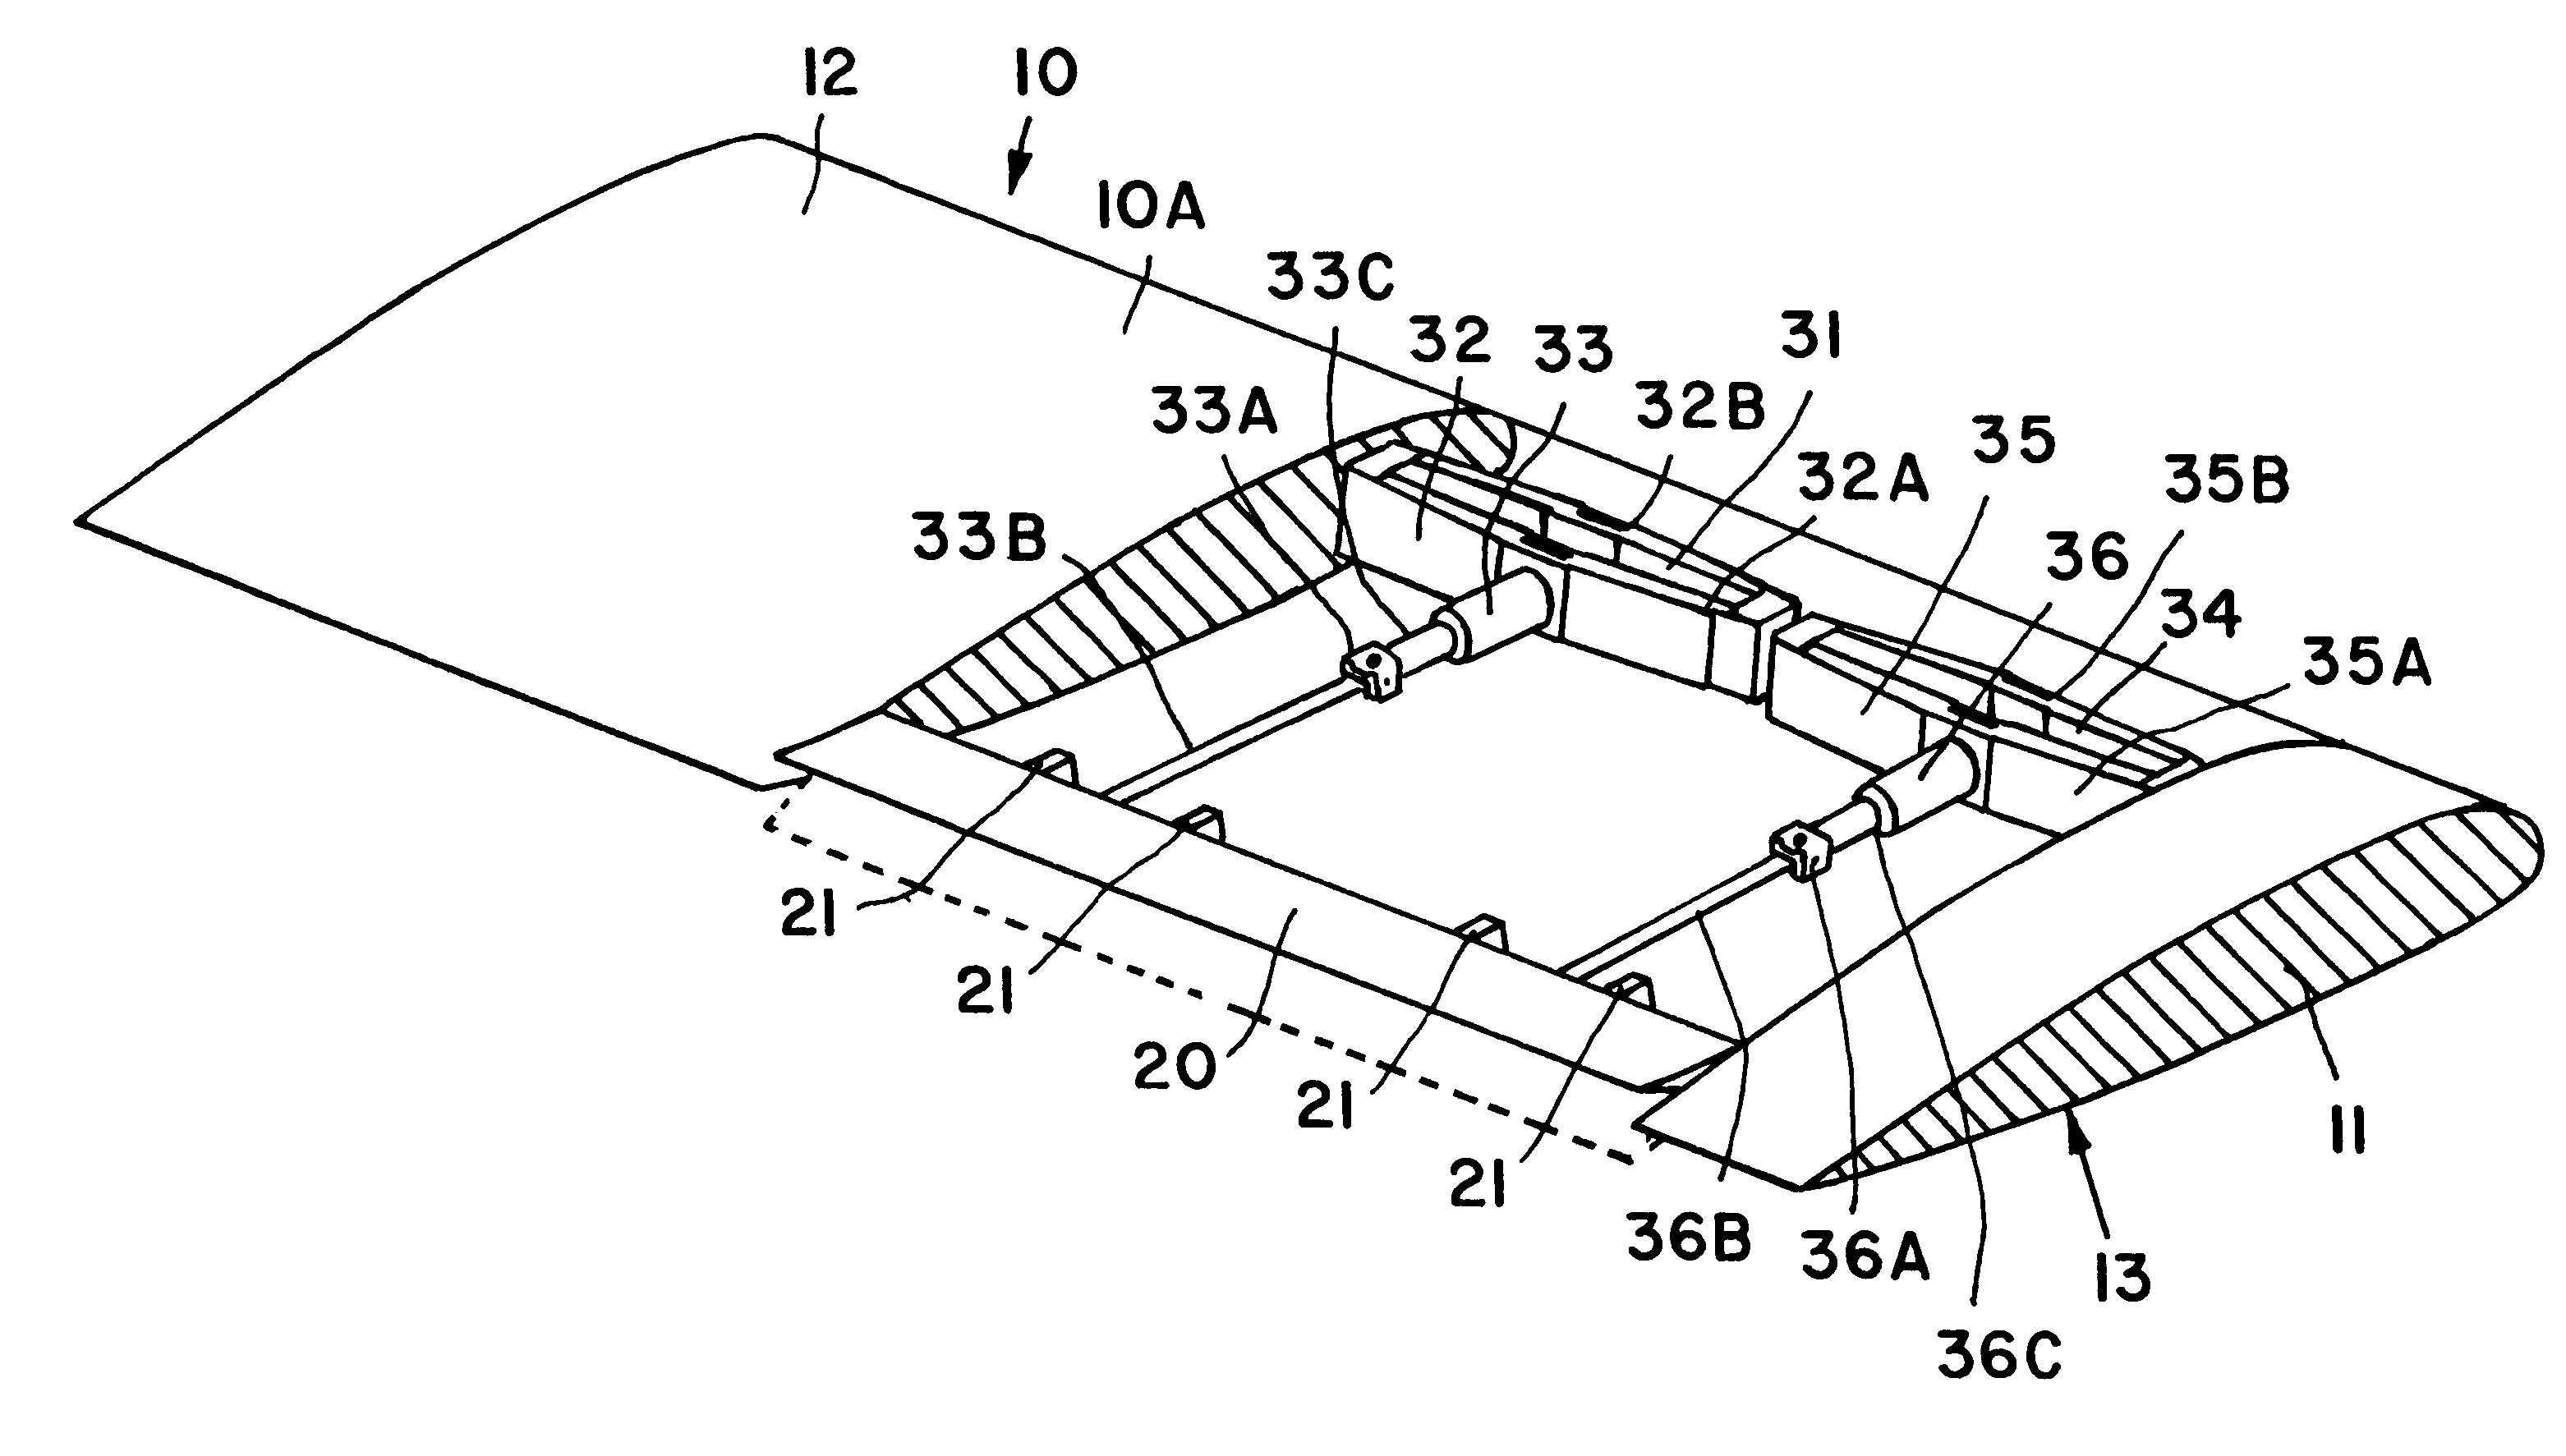 Airfoil member with a piezoelectrically actuated servo-flap